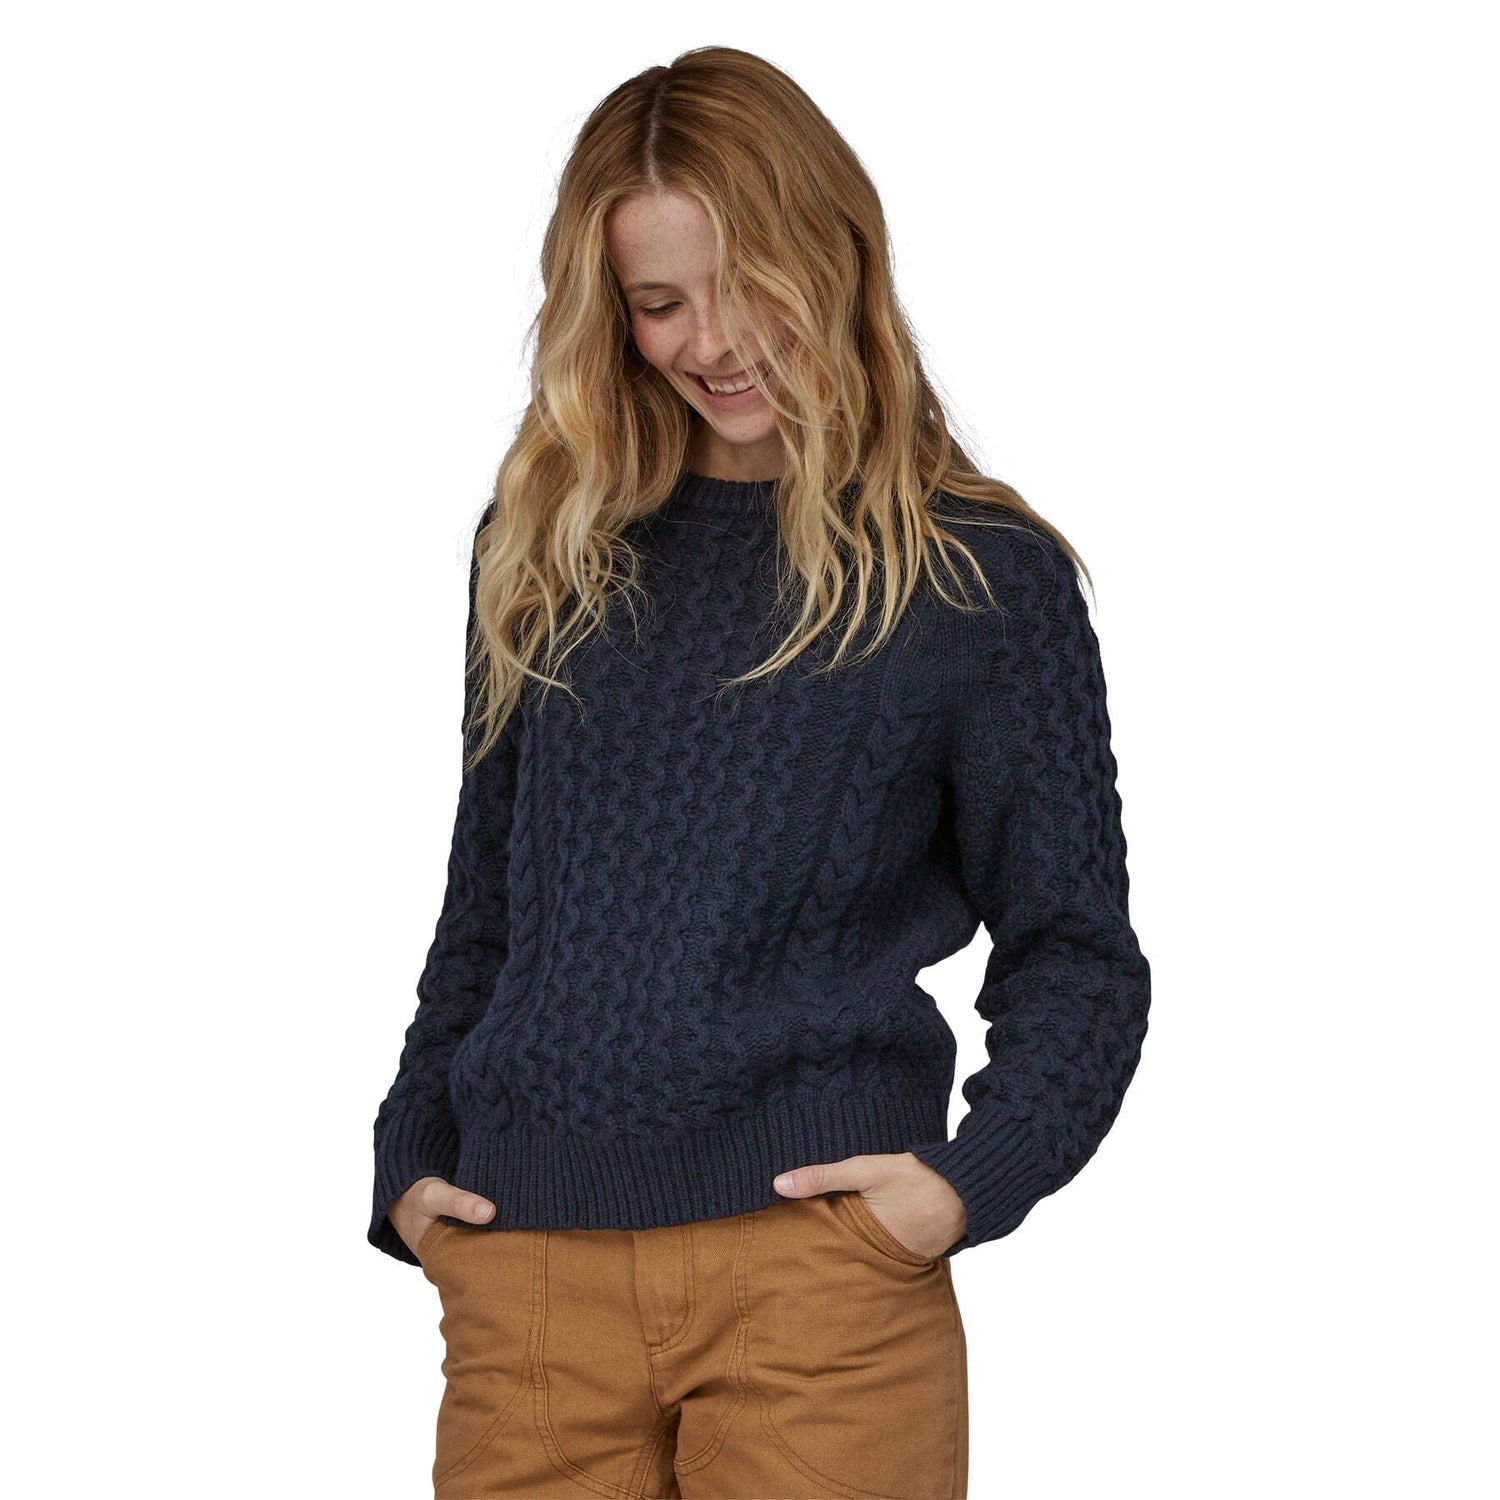 Patagonia Unisex Cable Knit Crewneck Sweater - Recycled Wool & Recycled Nylon New Navy Shirt